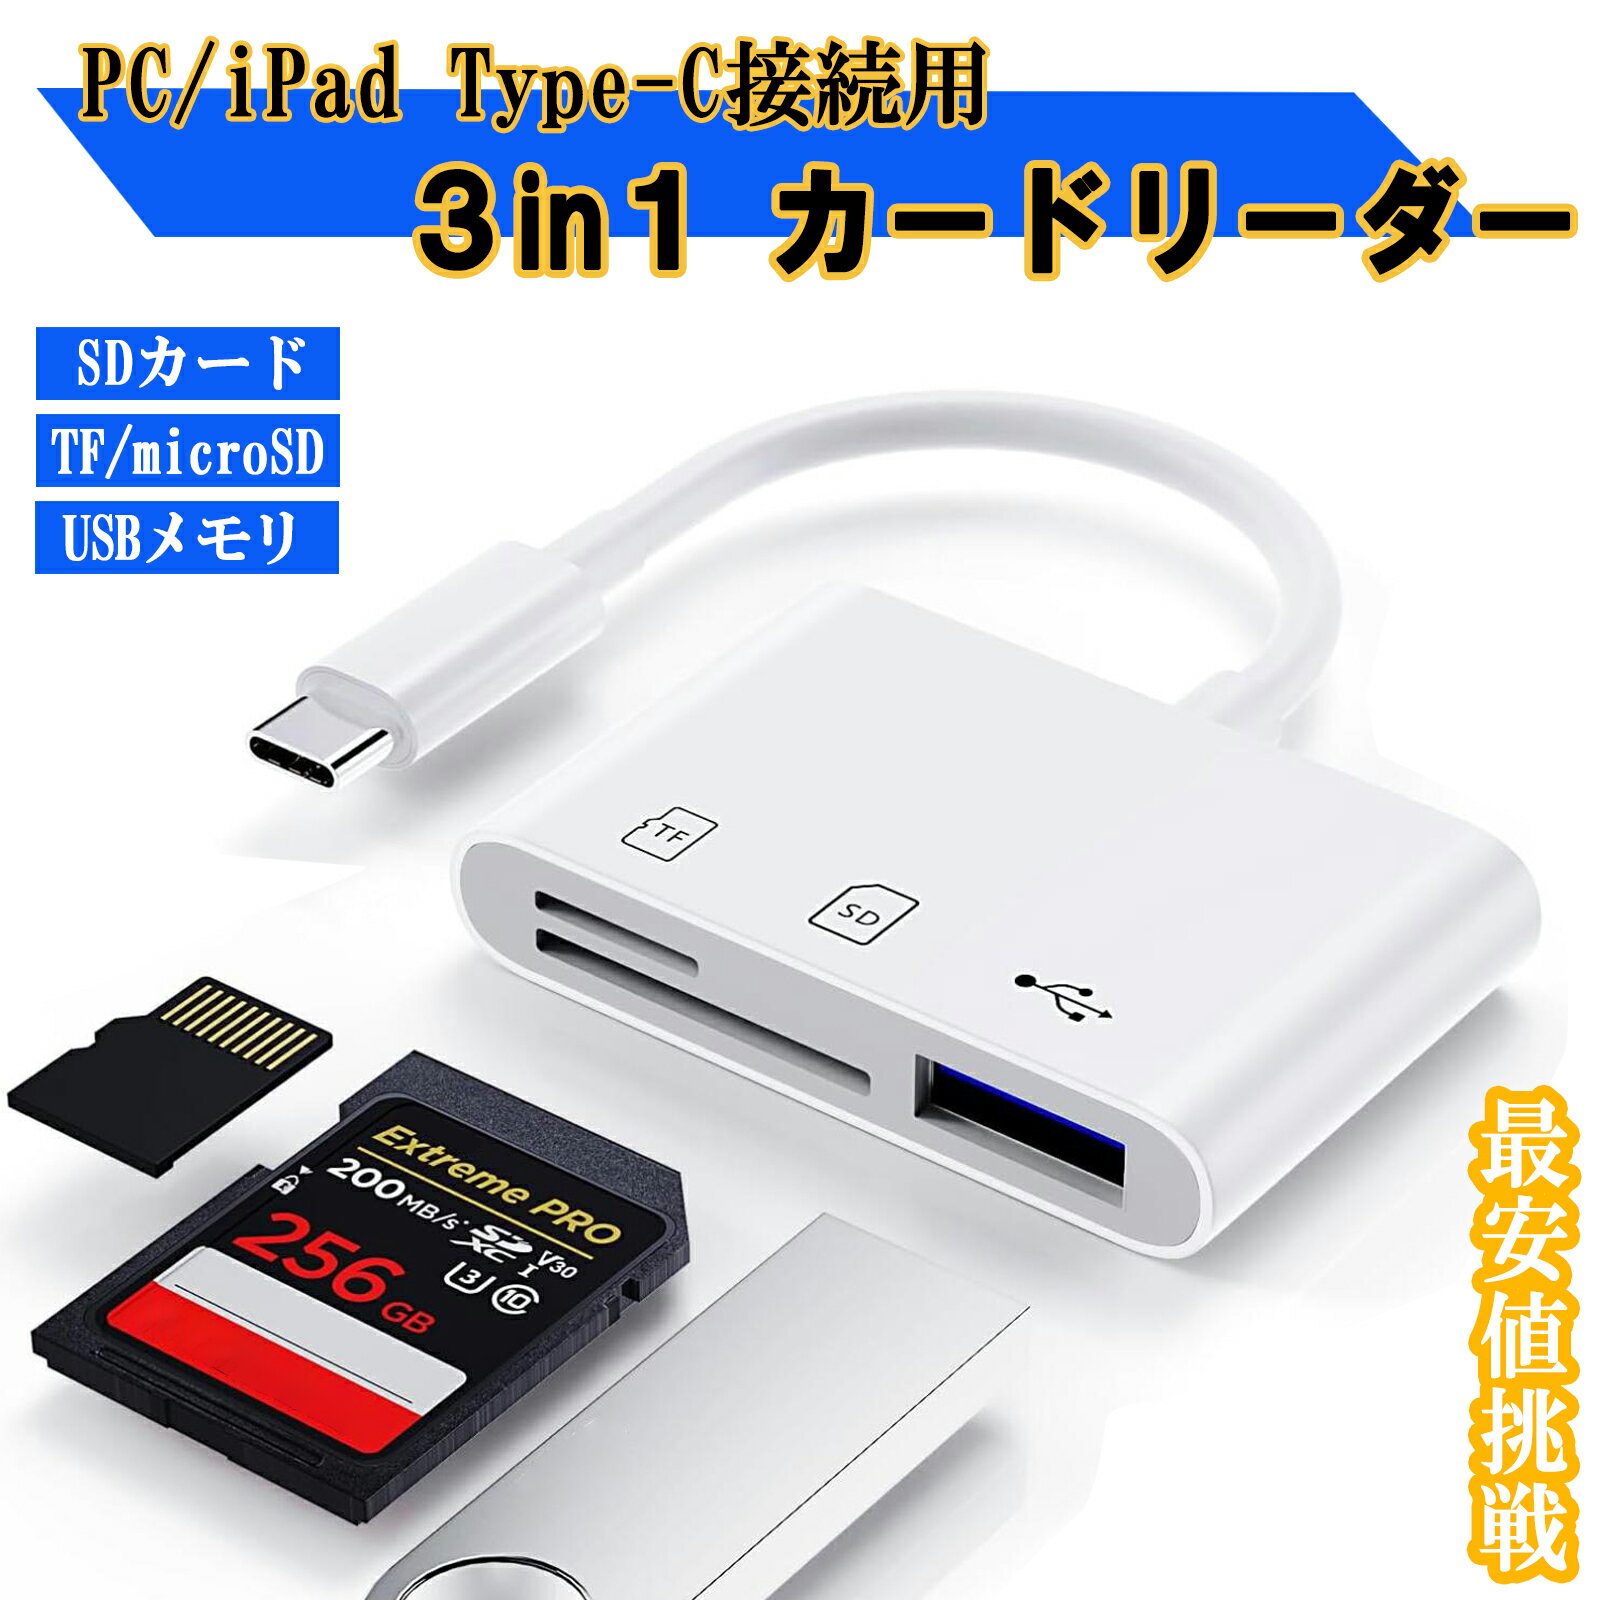 J[h[_[ SDJ[h iPhone15V[Y @iPad(type-c)@ Android(type-c)@p USB type-c 3in1J[h[_[ micro SD TFJ[h J[_[